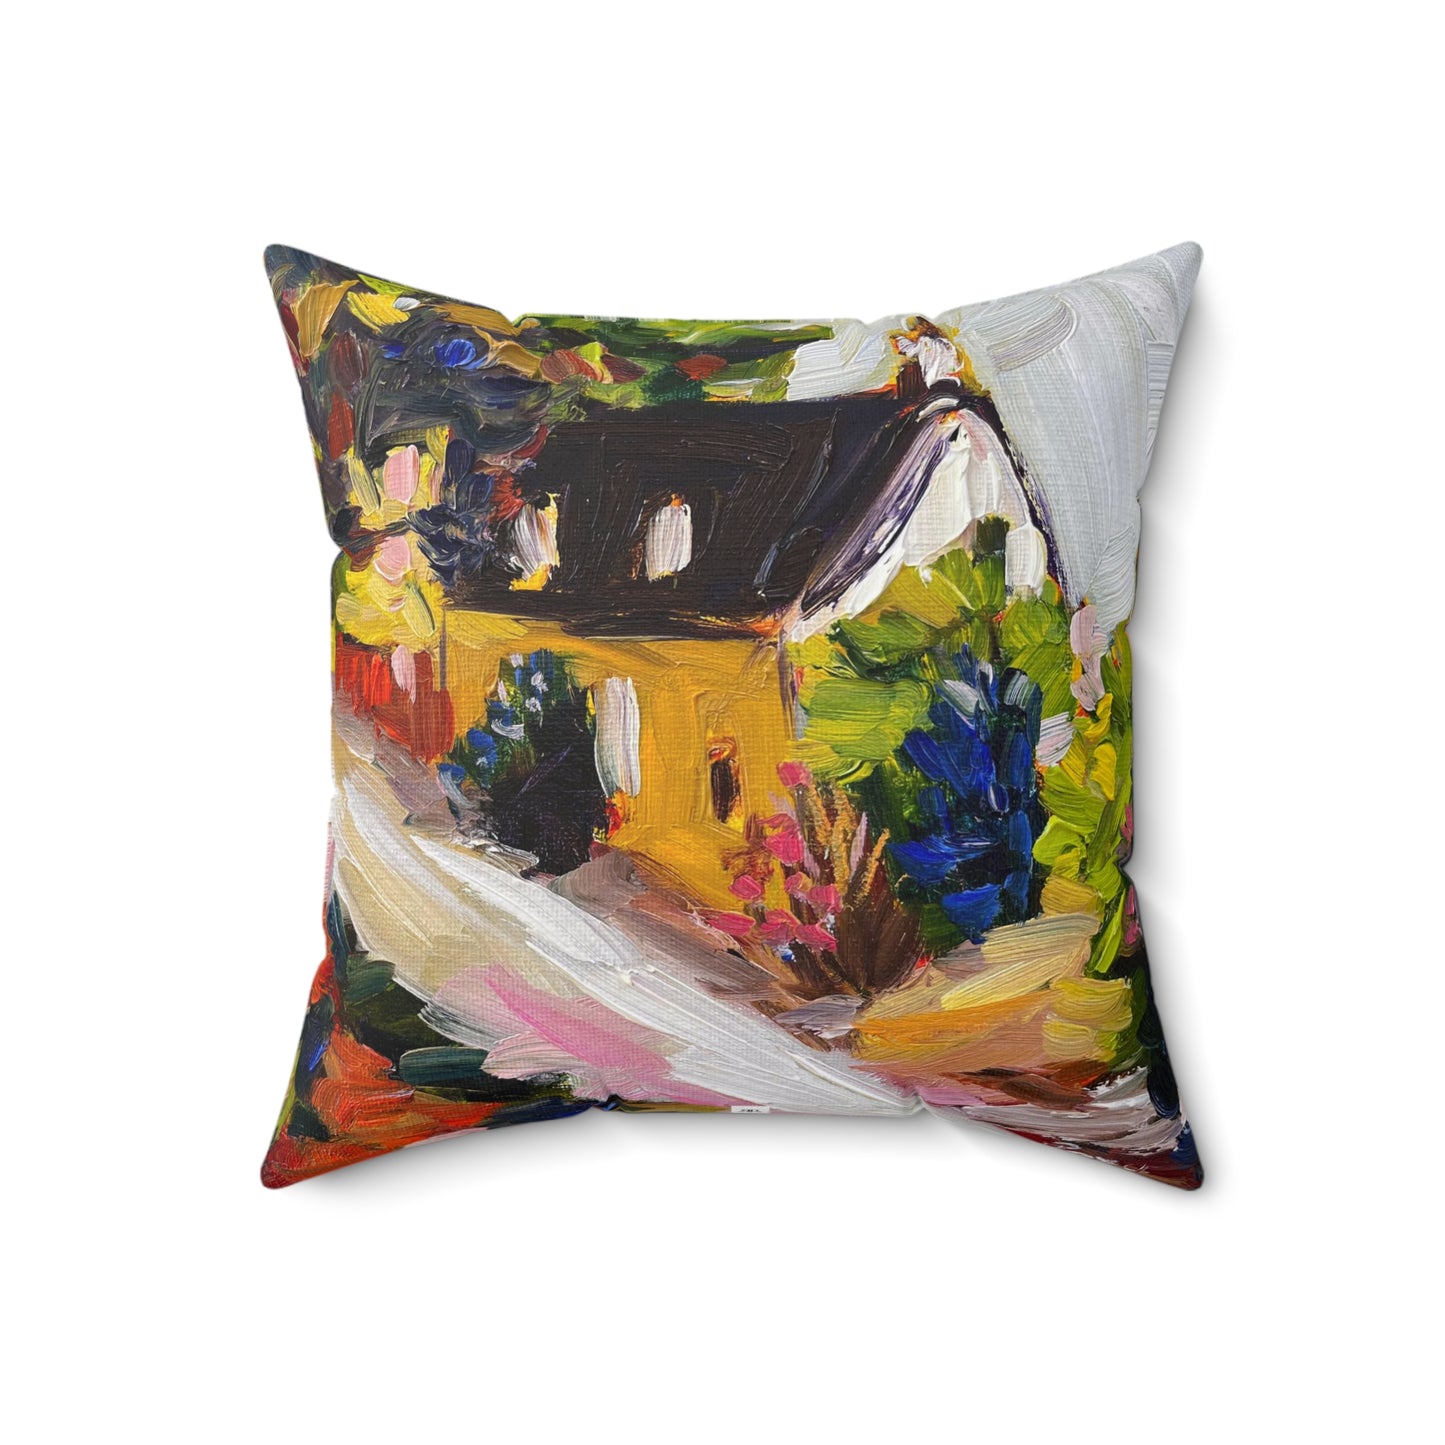 Thatched Cottage Snowshill Cotswolds  Indoor Spun Polyester Square Pillow